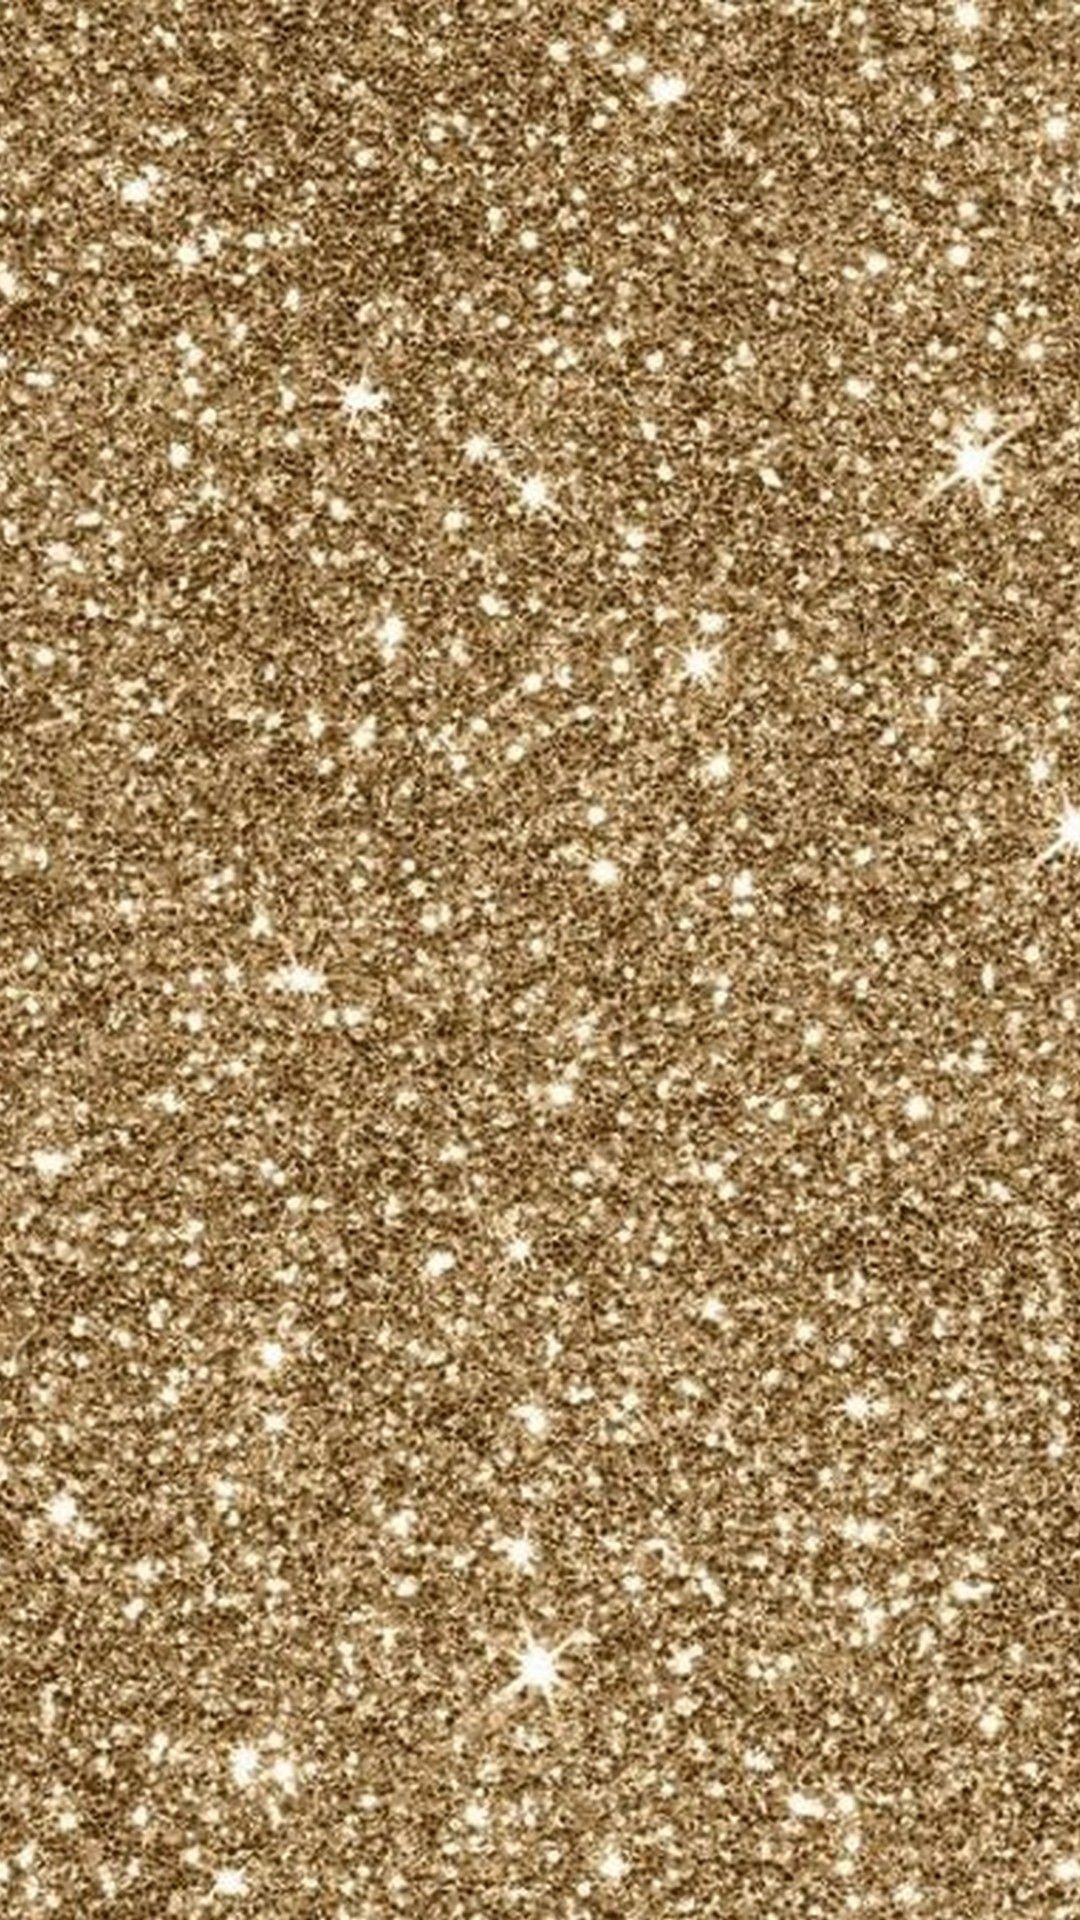 1080x1920 Gold Glitter Wallpaper For Android Best Android Wallpapers | Papel de parede brilhante, Papel de parede de ouro, Papel de parede gliter